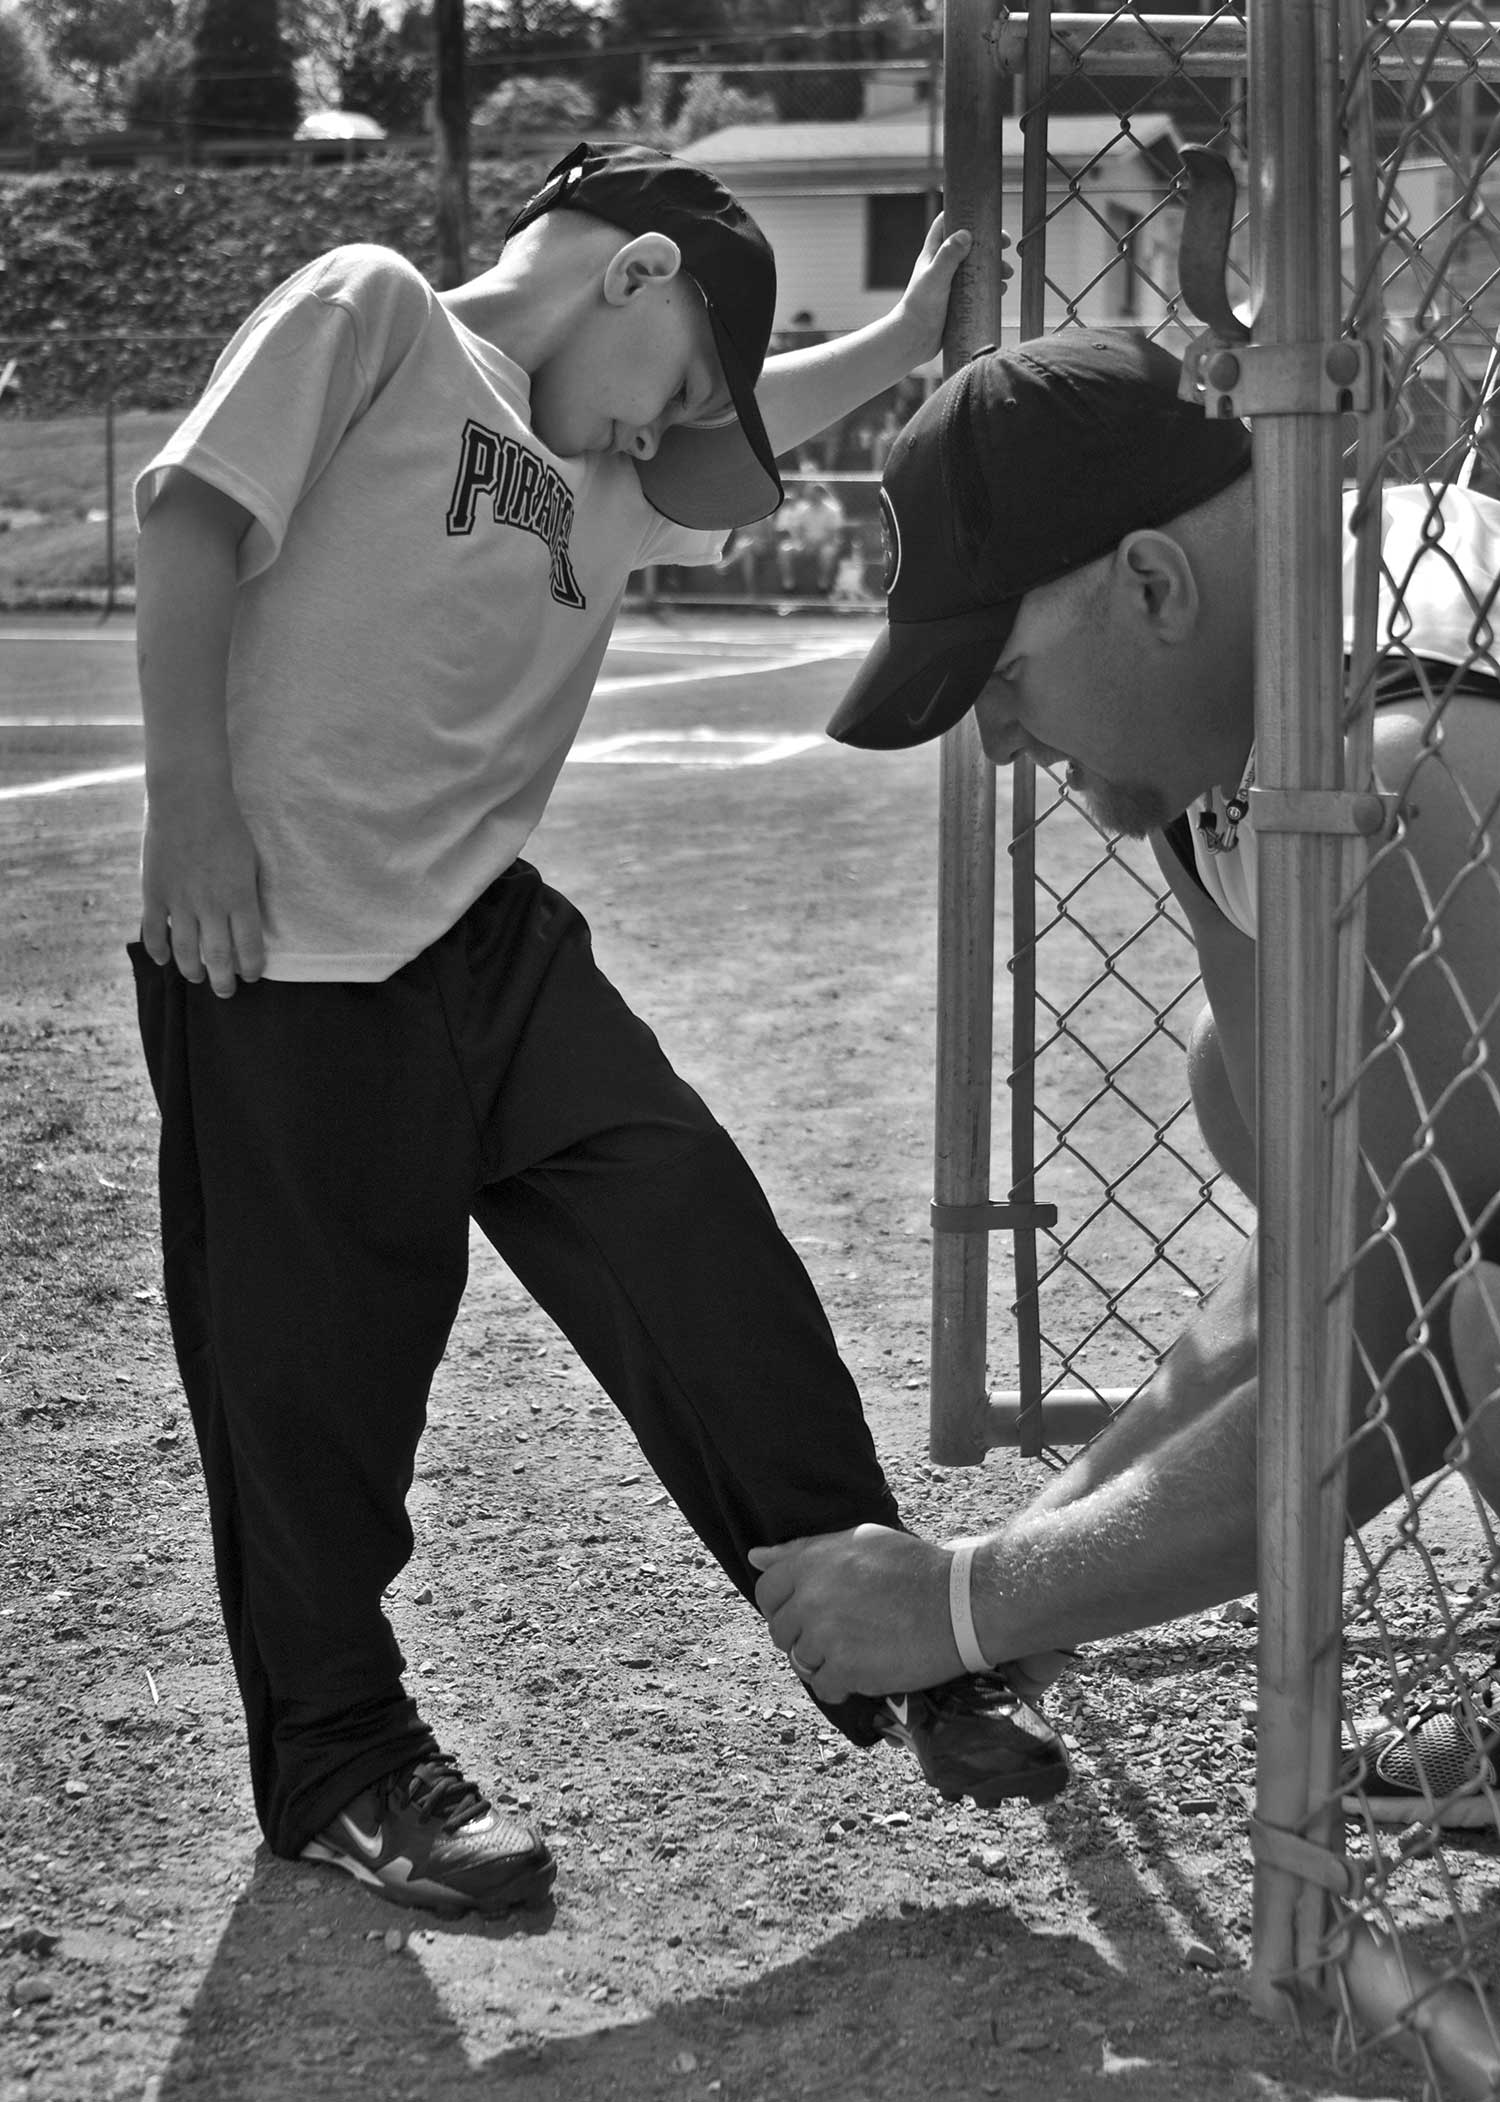 Rick Berry (right) helps his son Landon Berry (left) get ready for his little league baseball game. photo by Stephanie Myers - 2010